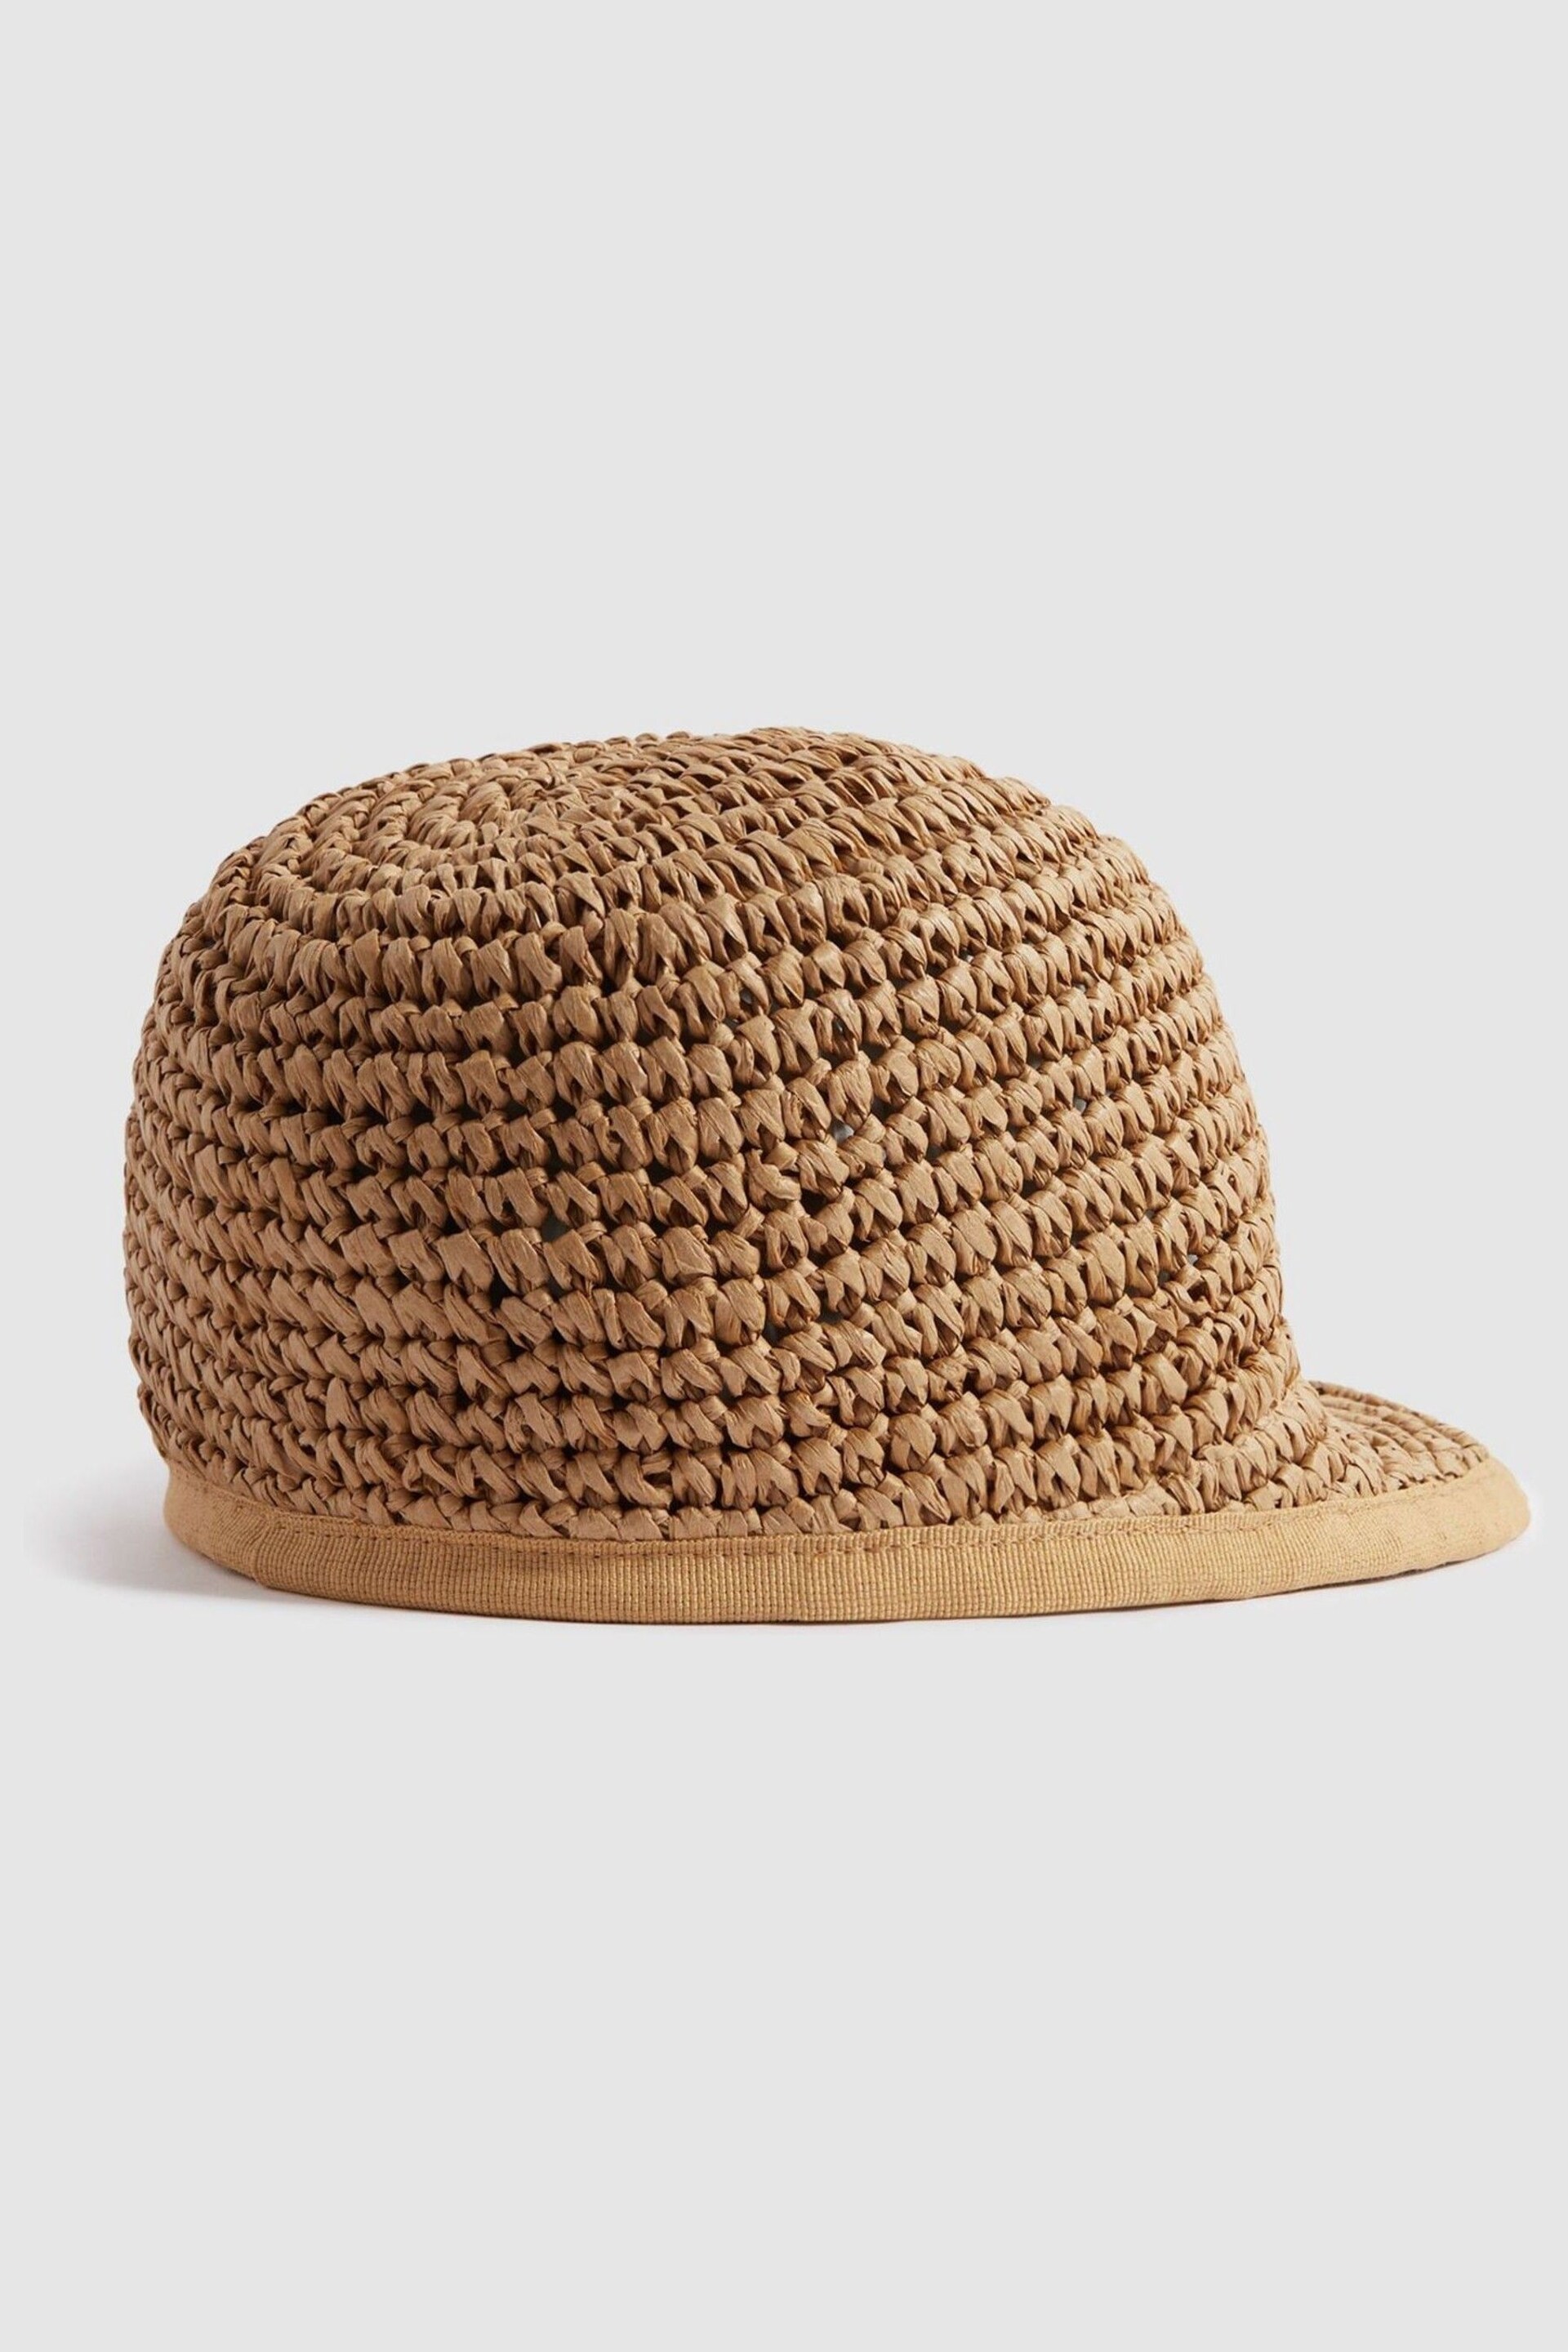 Reiss Natural Penelope Woven Straw Cap - Image 3 of 4